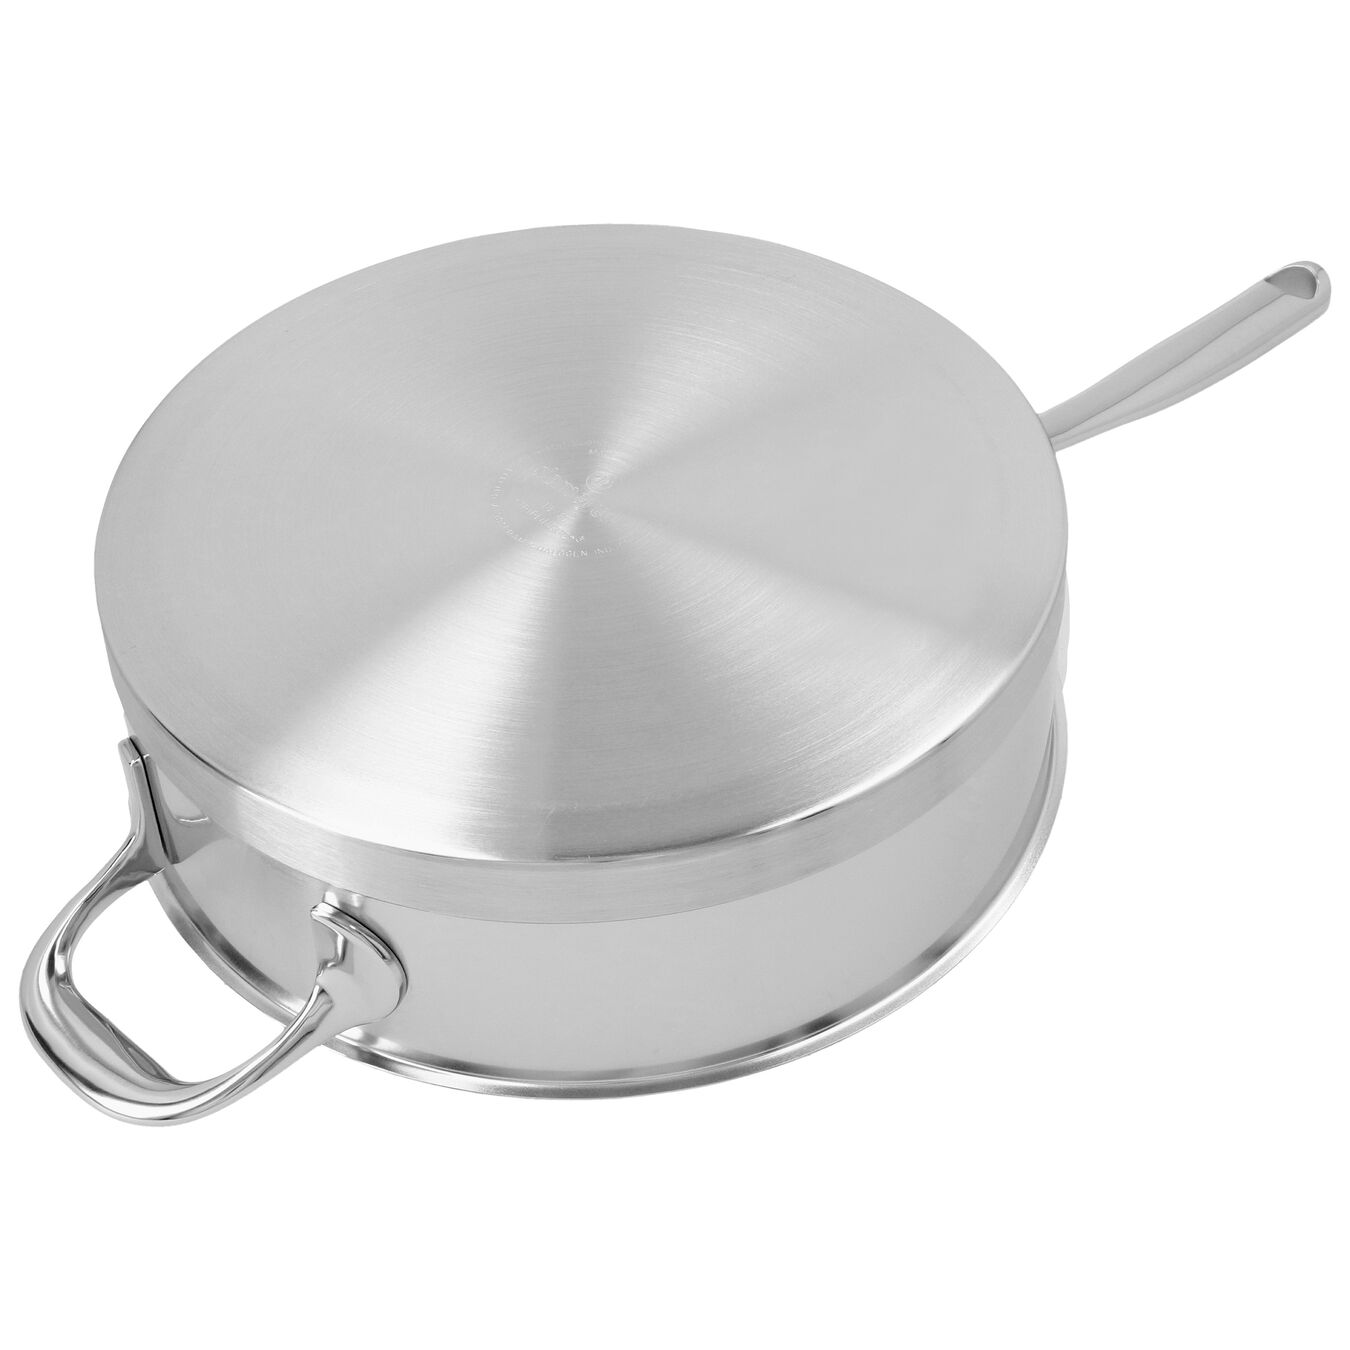 24 cm round 18/10 Stainless Steel Saute pan with lid silver,,large 2